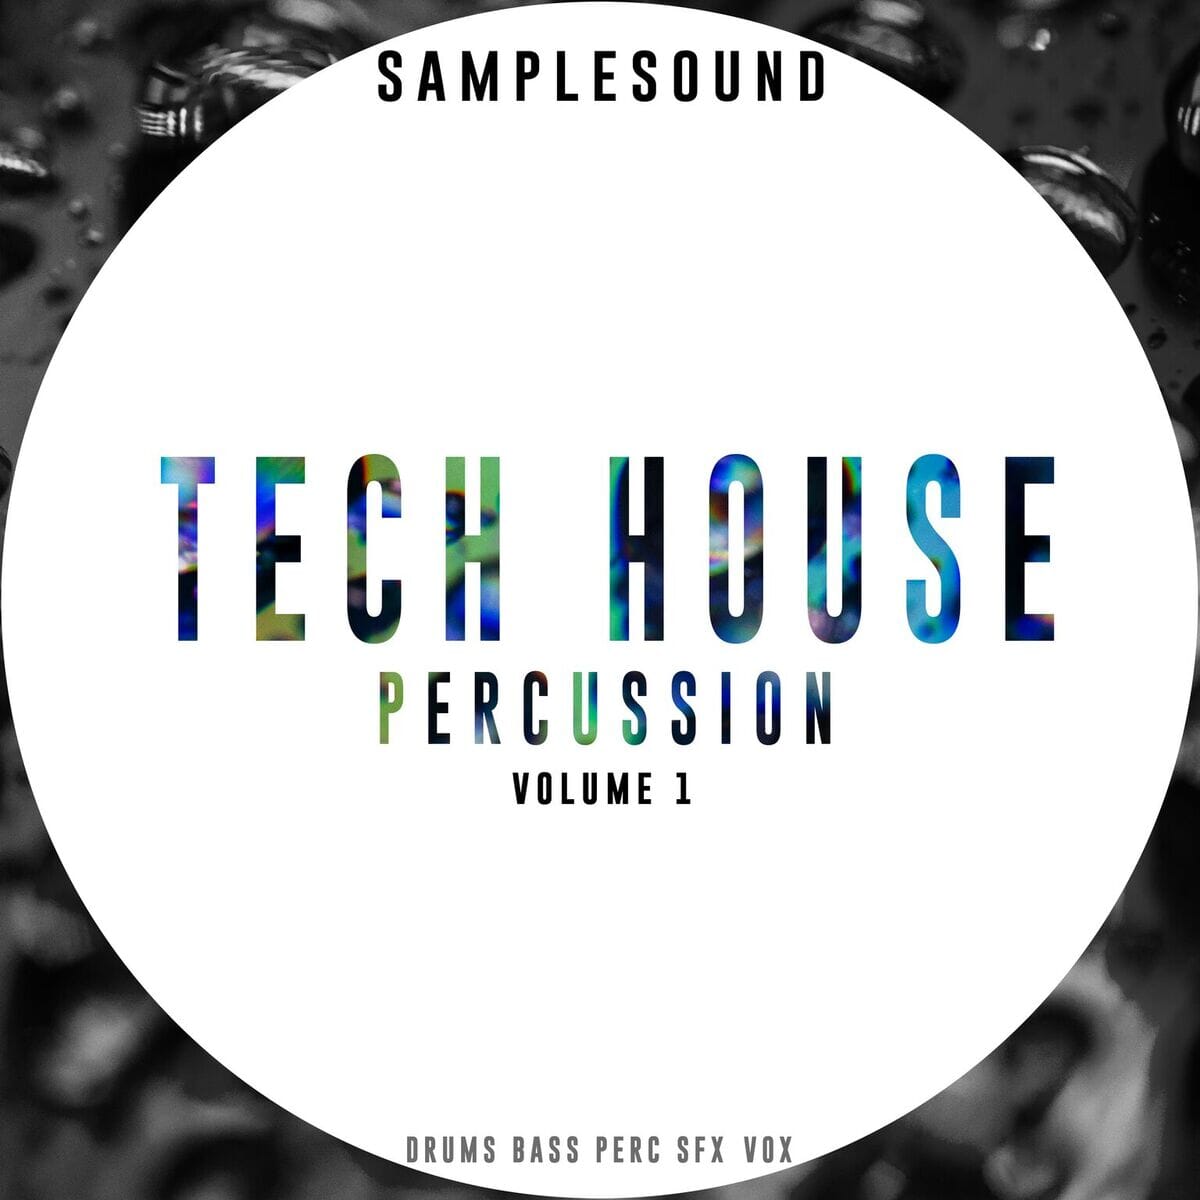 Tech House Percussion Volume 1 Sample Pack Samplesound